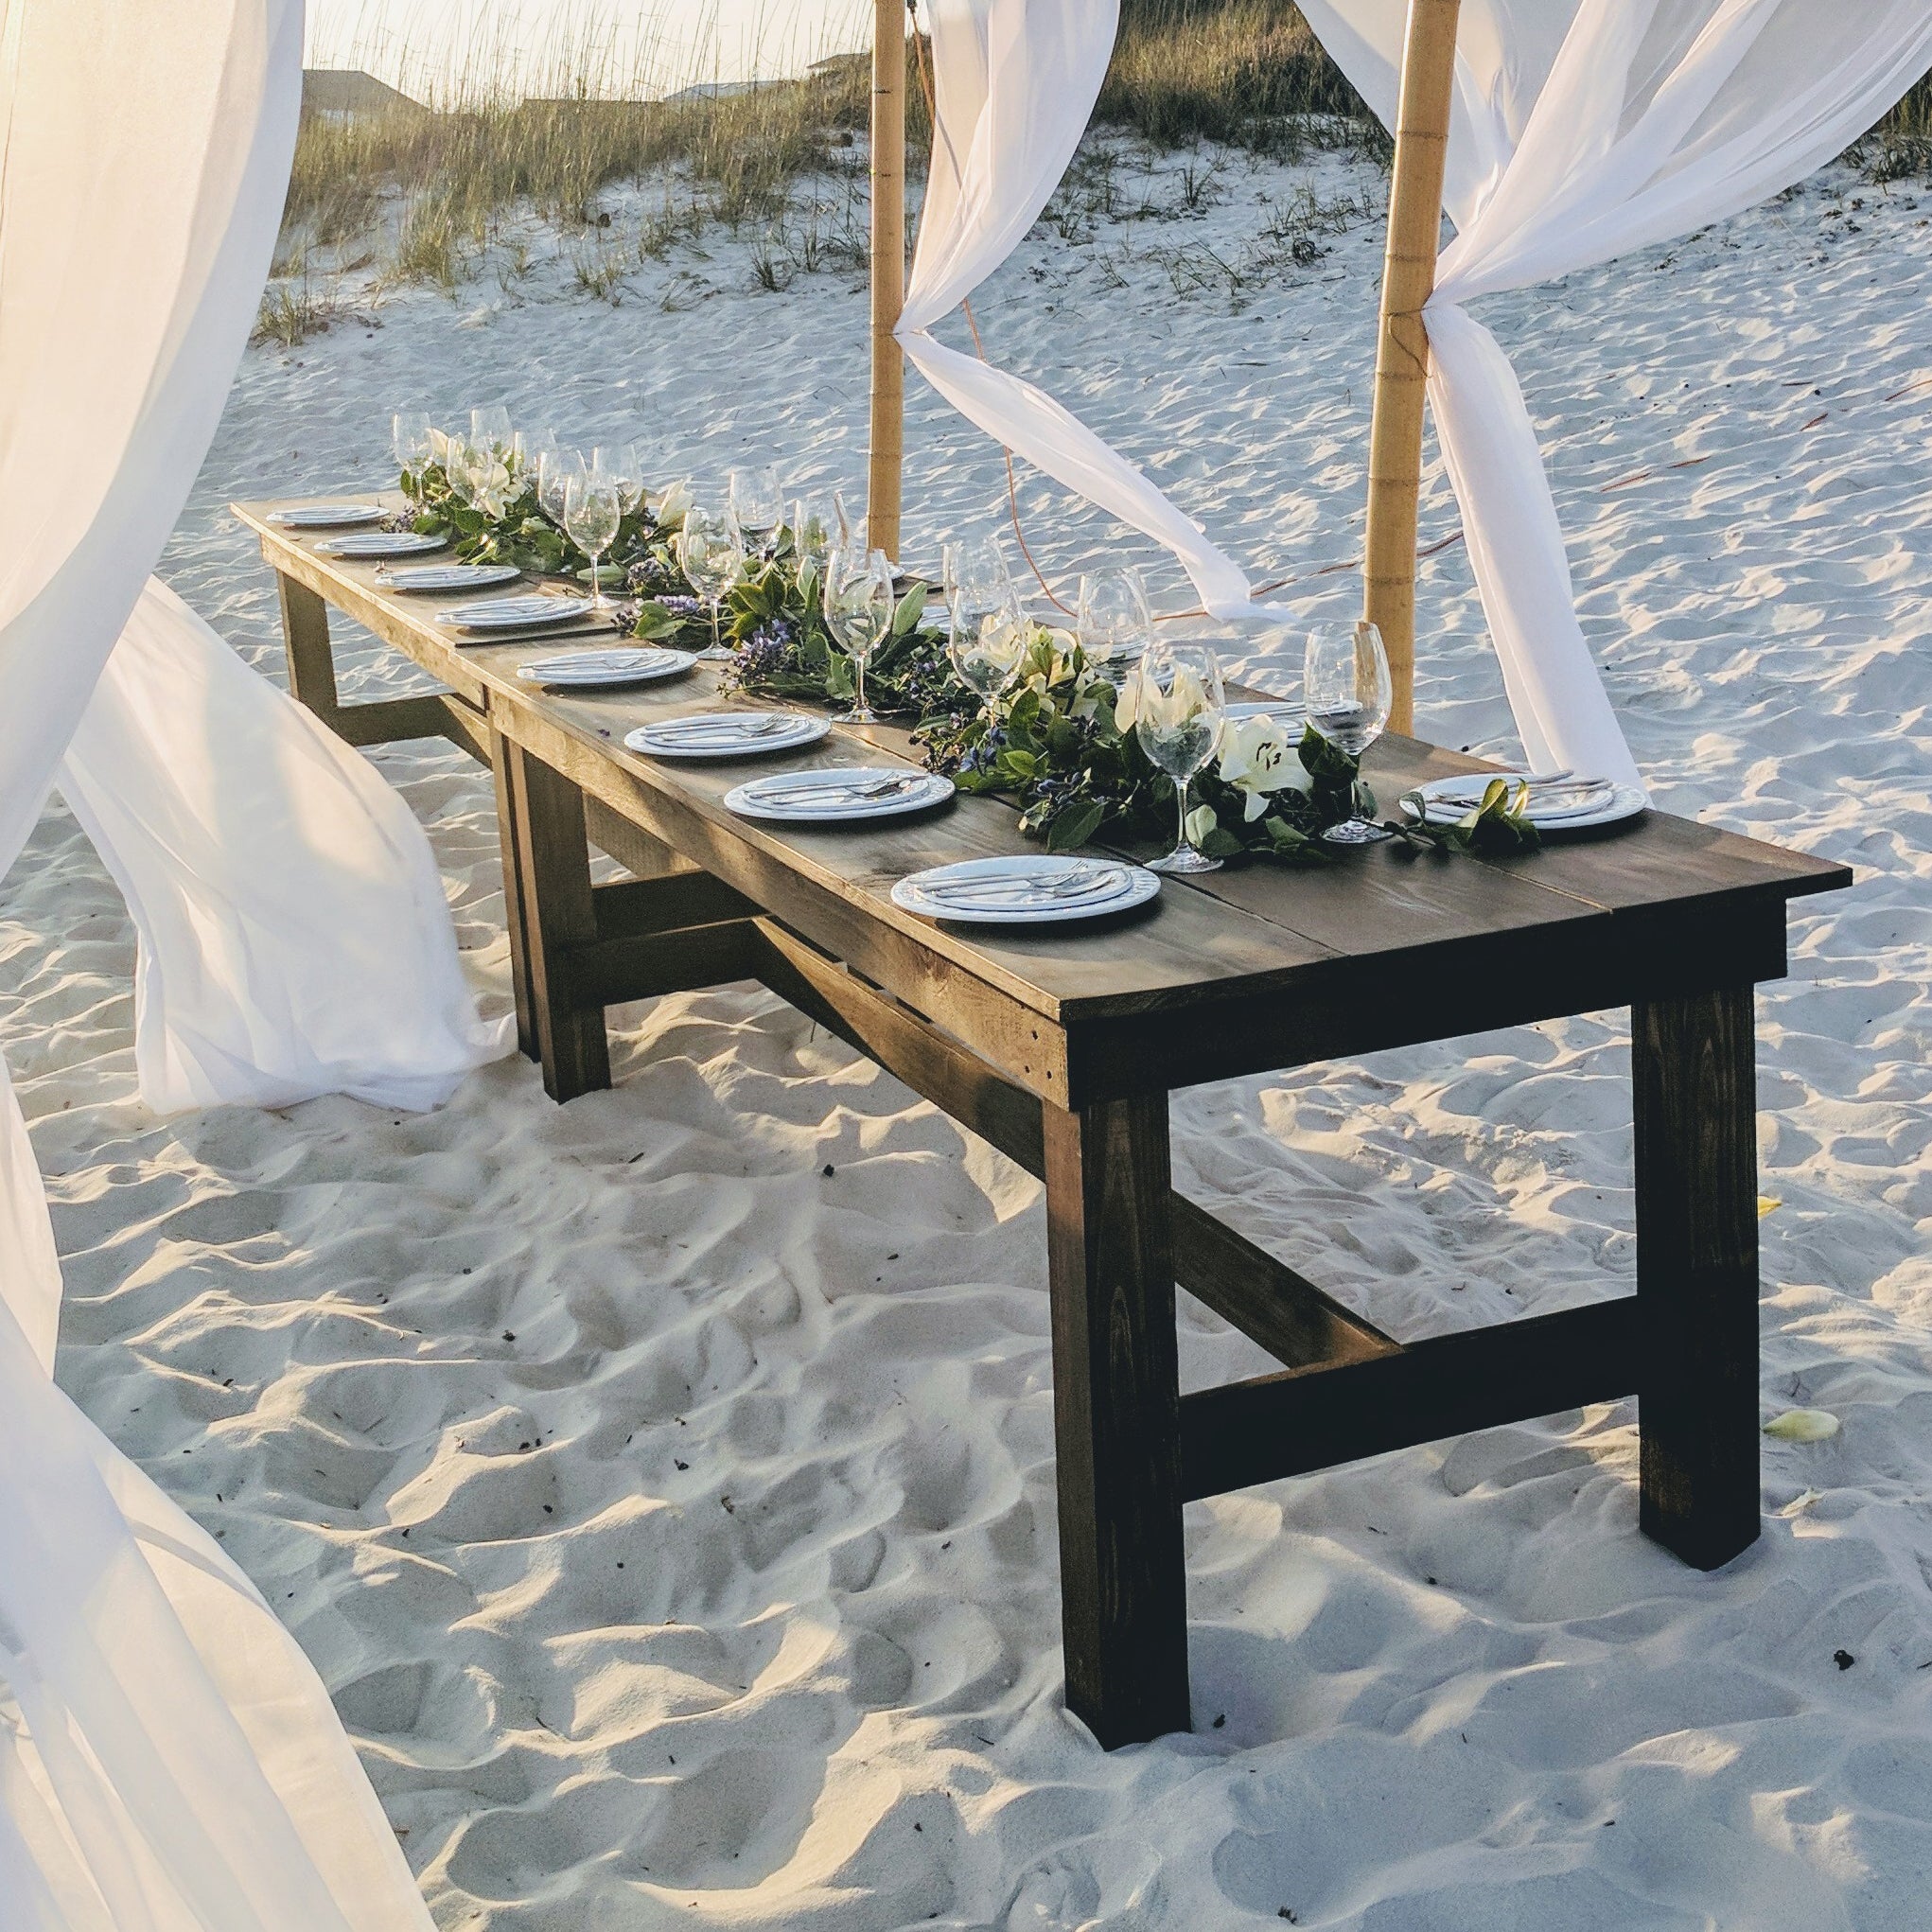 table rentals in panama city florida wedding party event farmhouse table rentals